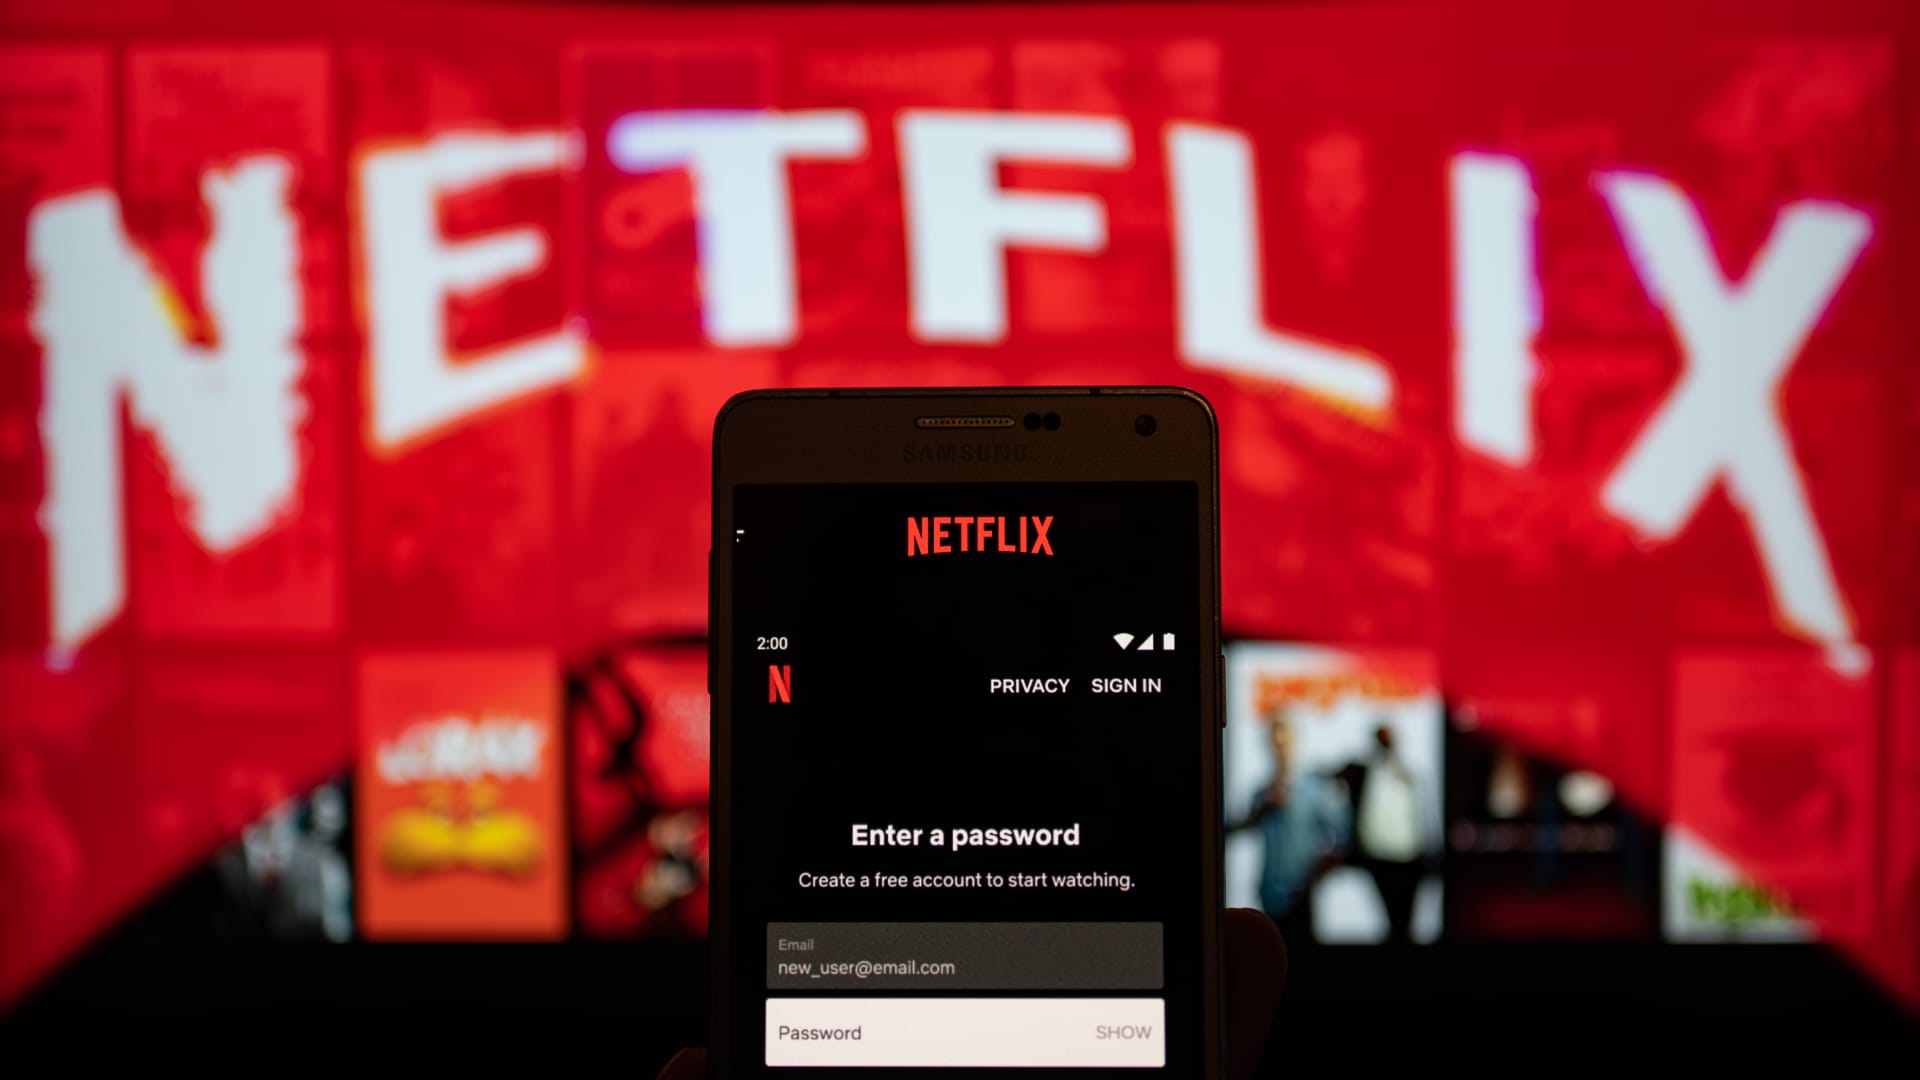 Netflix stock sinks as Wall Street looks for clarity on revenue growth